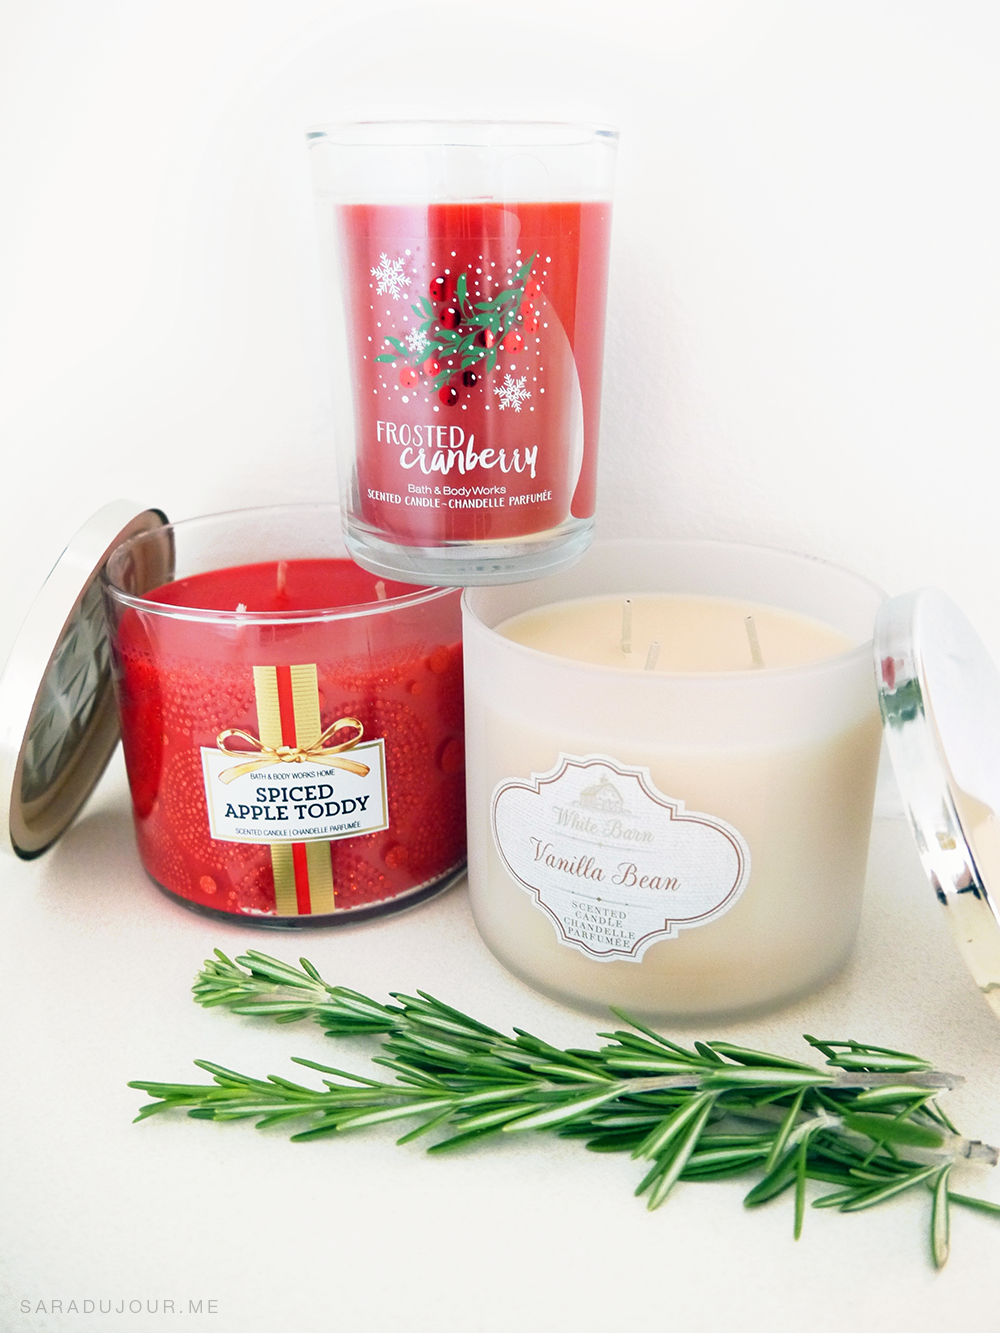 Bath and Body Works Holiday Candle Haul | Sara du Jour